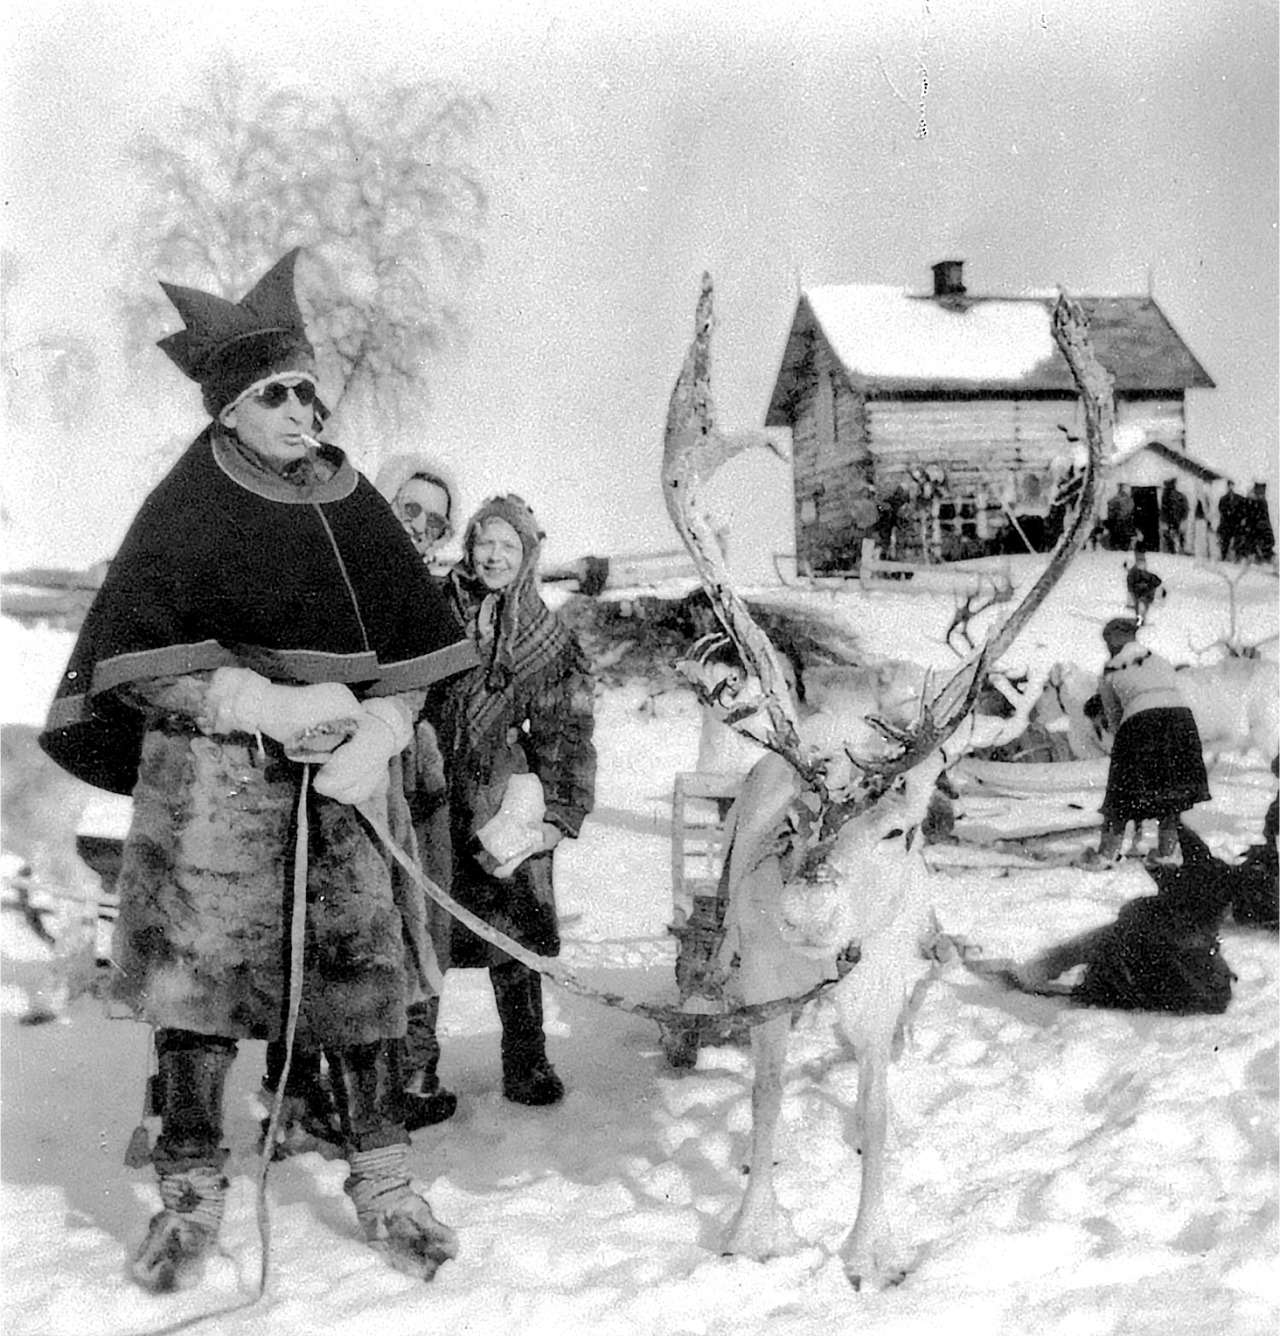 A very stylish Sámi man wearing sunglasses and smoking a cigarette, while holding the reins to his white reindeer.
Kautokeino, Norway.
C. 1910 – 1922.
Photo by Petter L. Smith. #kautokeino#norway#finnmark#reindeer#vintage photo#vintage photography#sámi#sápmi